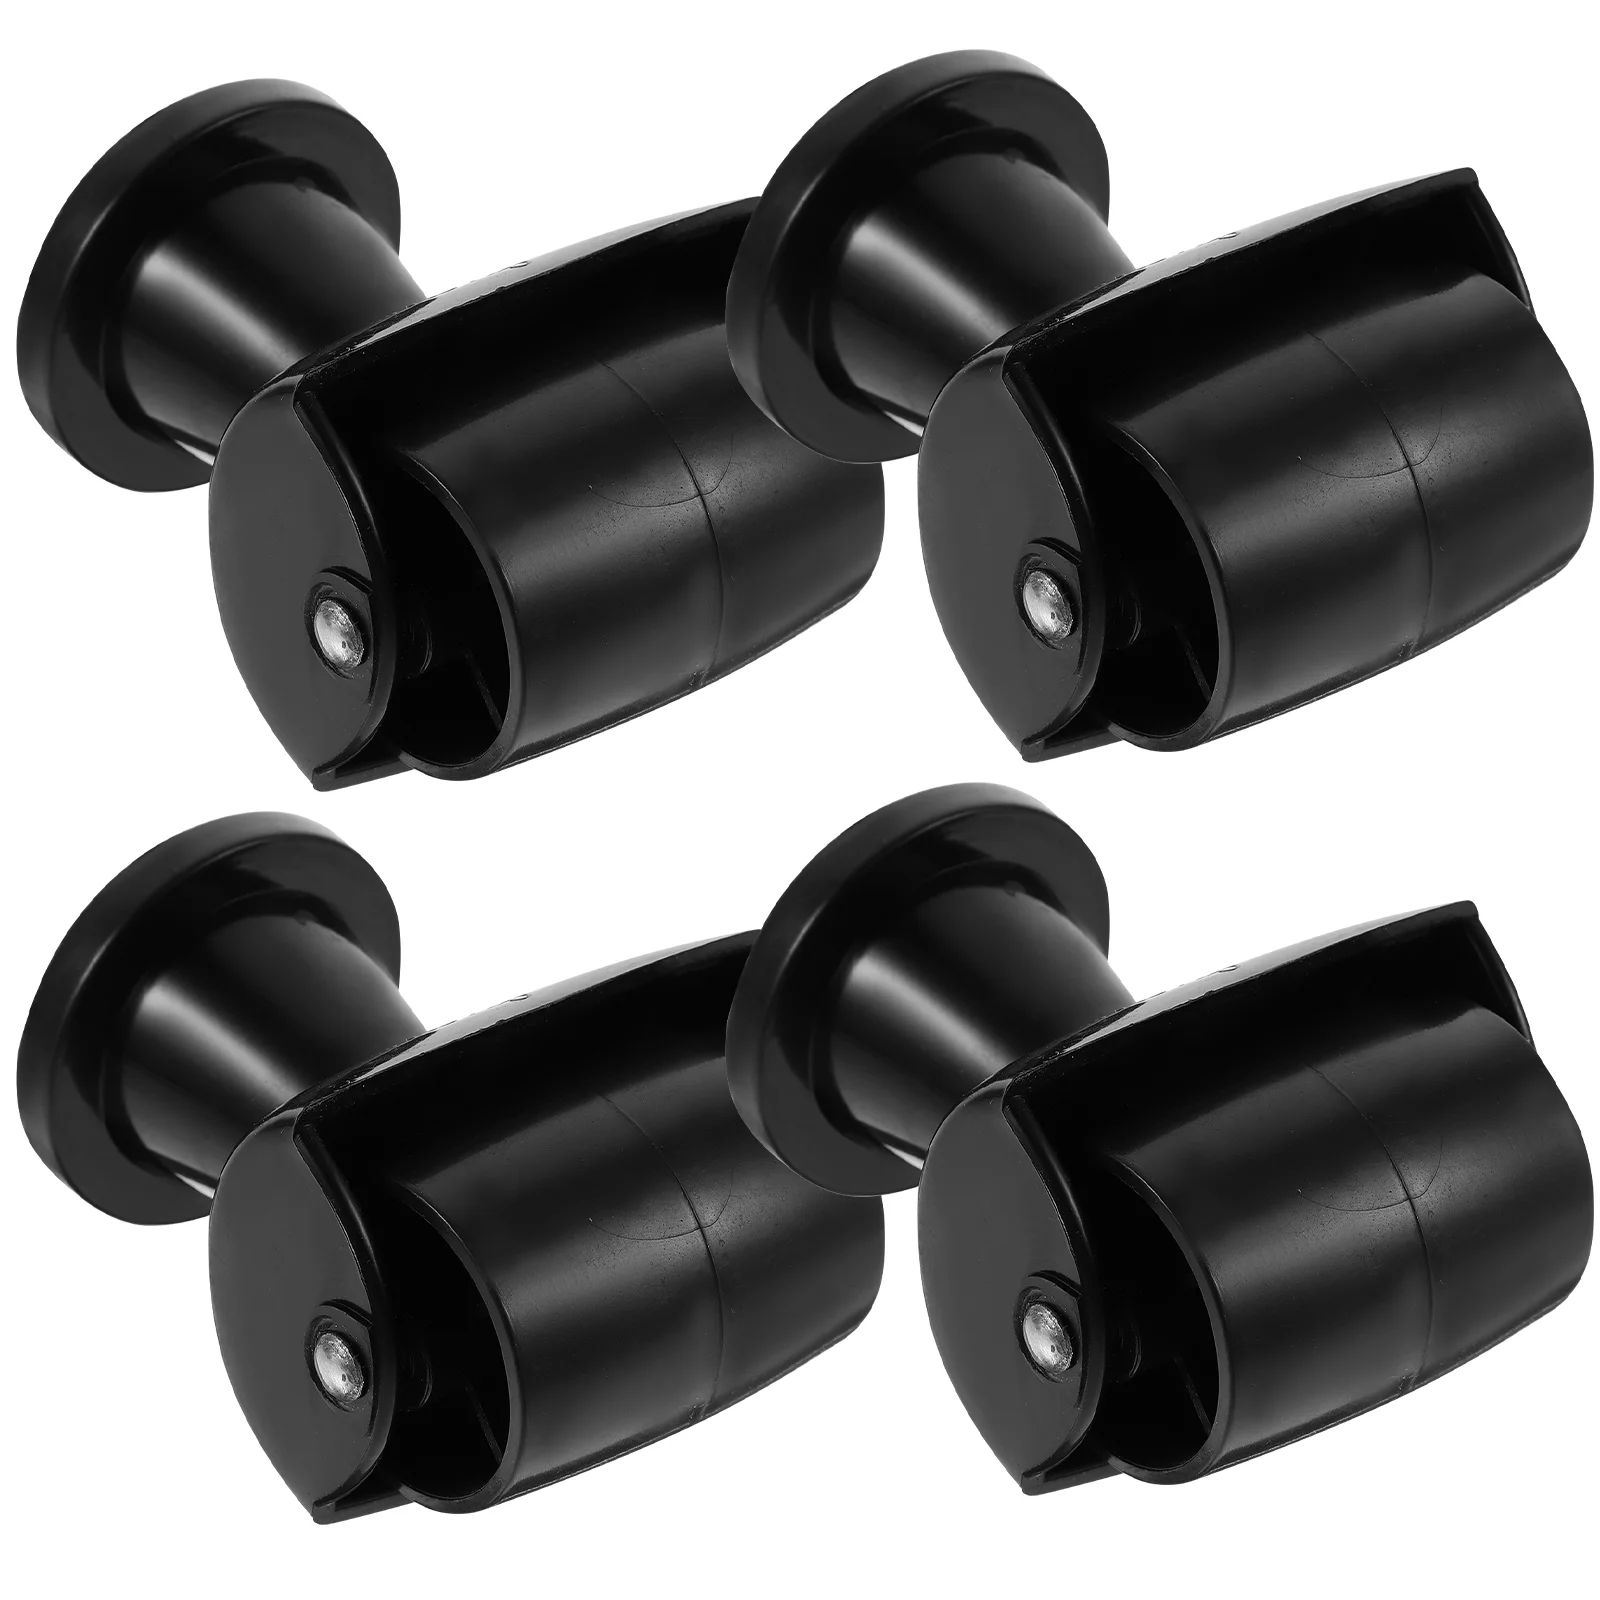 

4 Pcs Heavy Duty Caster Wheels Office Computer Chair Casters Anti-skid Wheels Furniture Coffee Table Legs Abs Home Desk